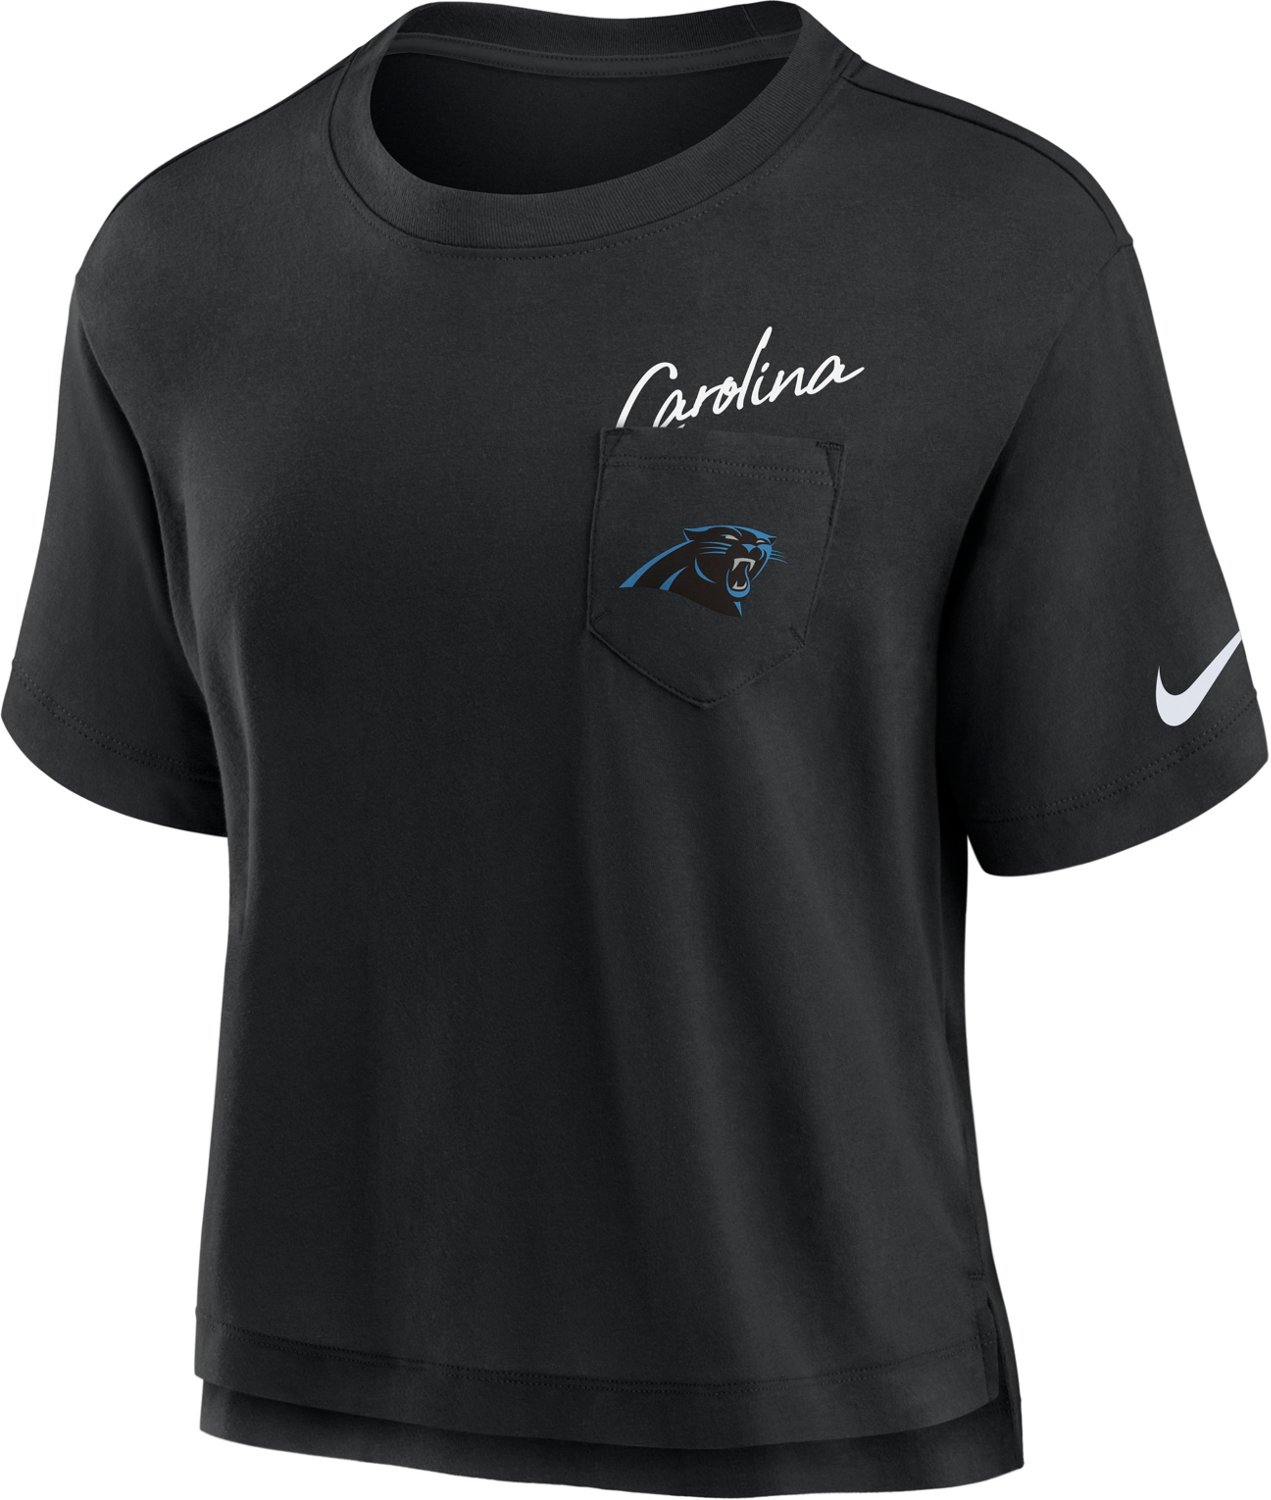 Carolina Panthers Official Shop  Panthers Jerseys, Apparel and Gear at the  Online Panthers Store